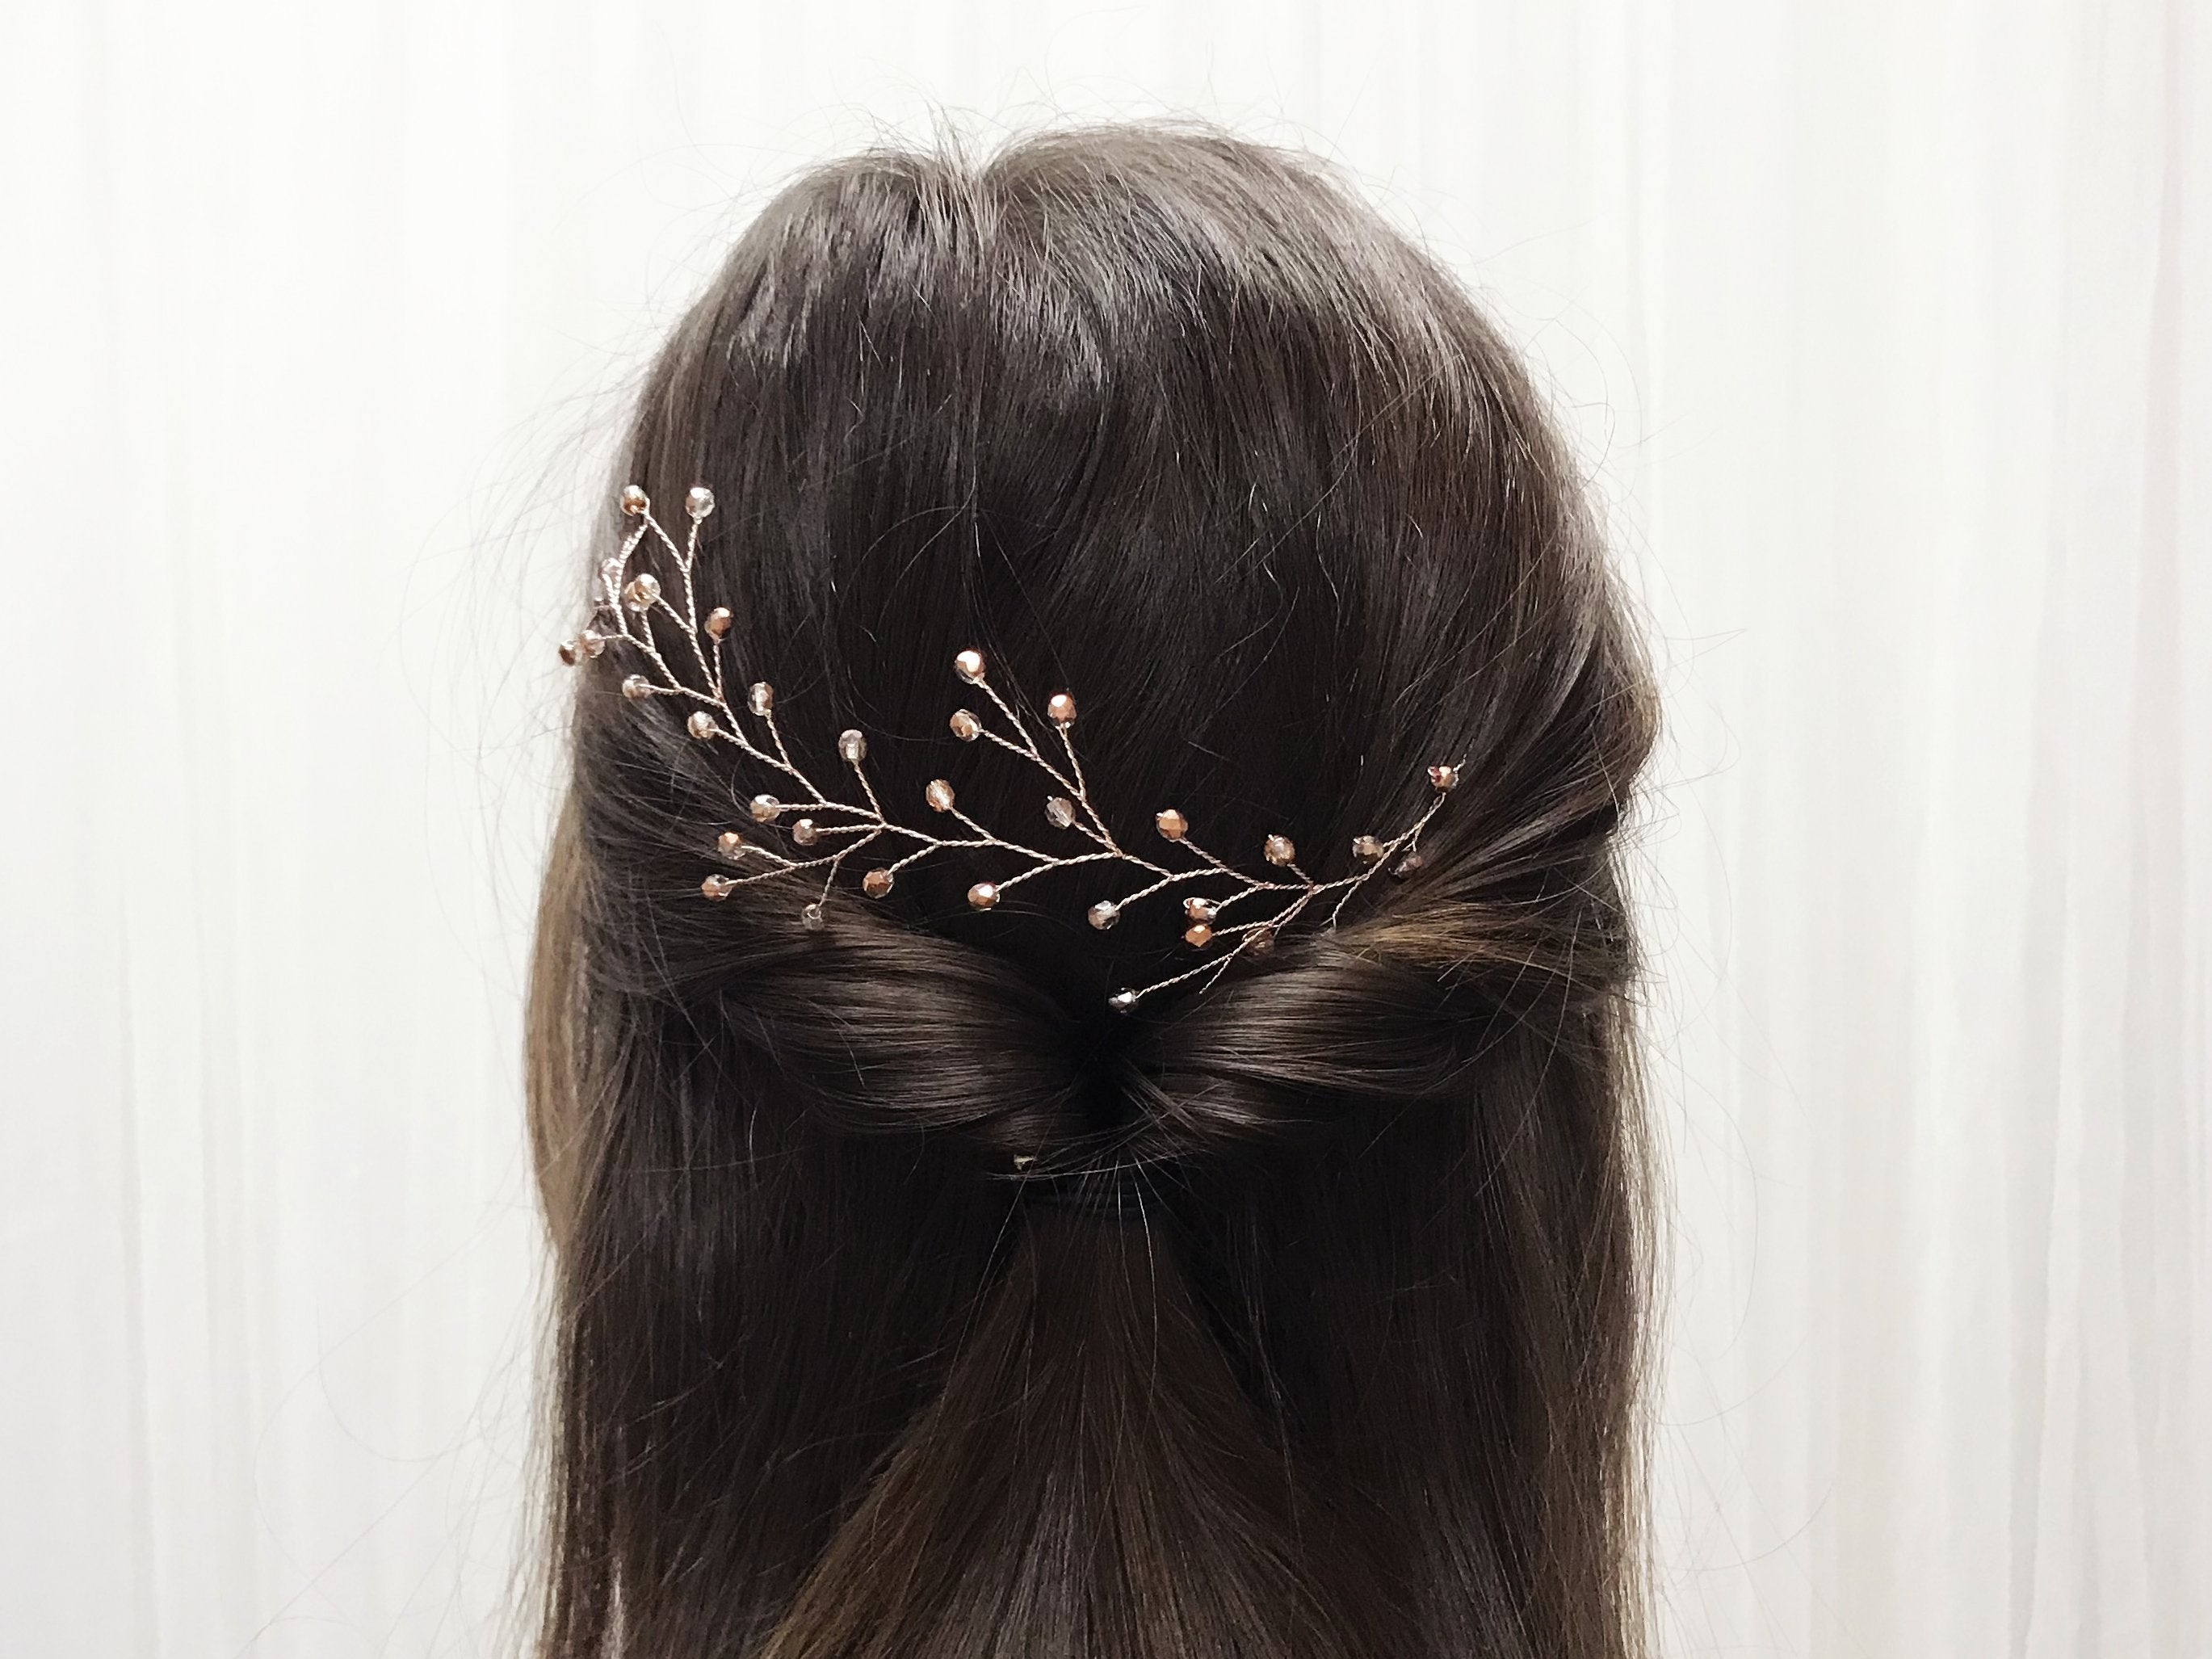 Rose gold crystal botanical branch hair vine for updo or half up wedding hair - Small Rosemary